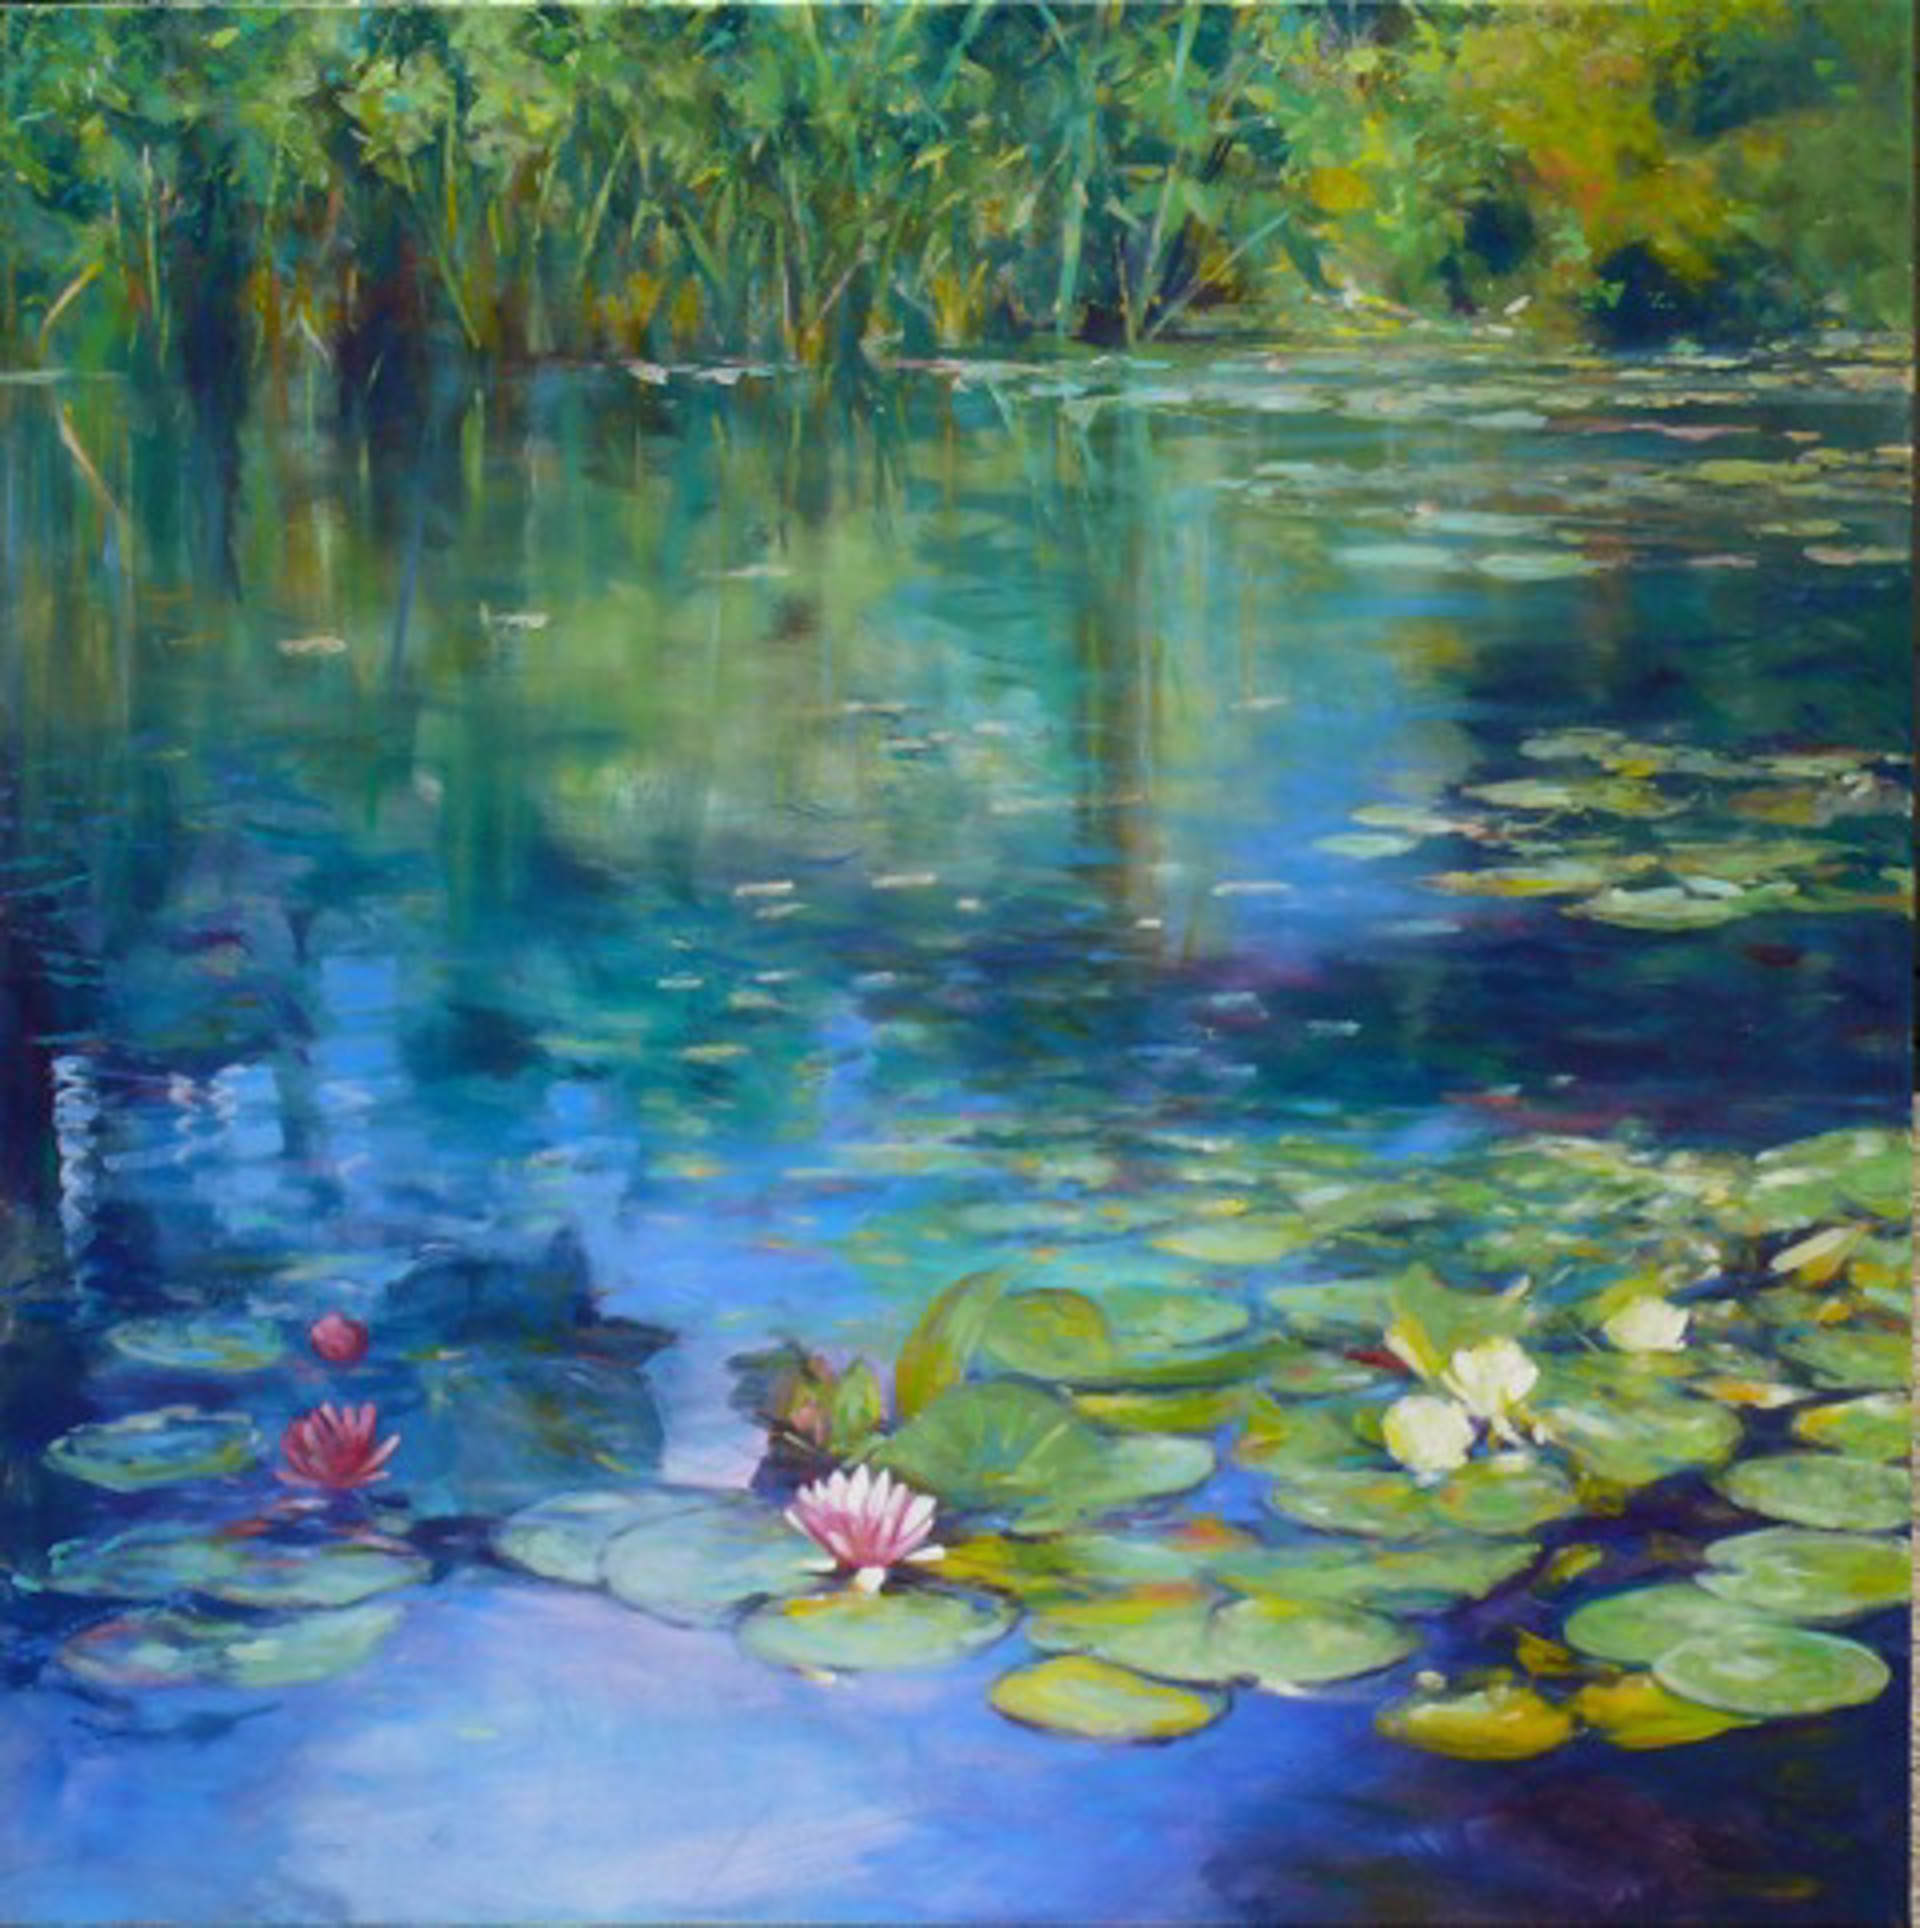 New Lilies by Paul Battams